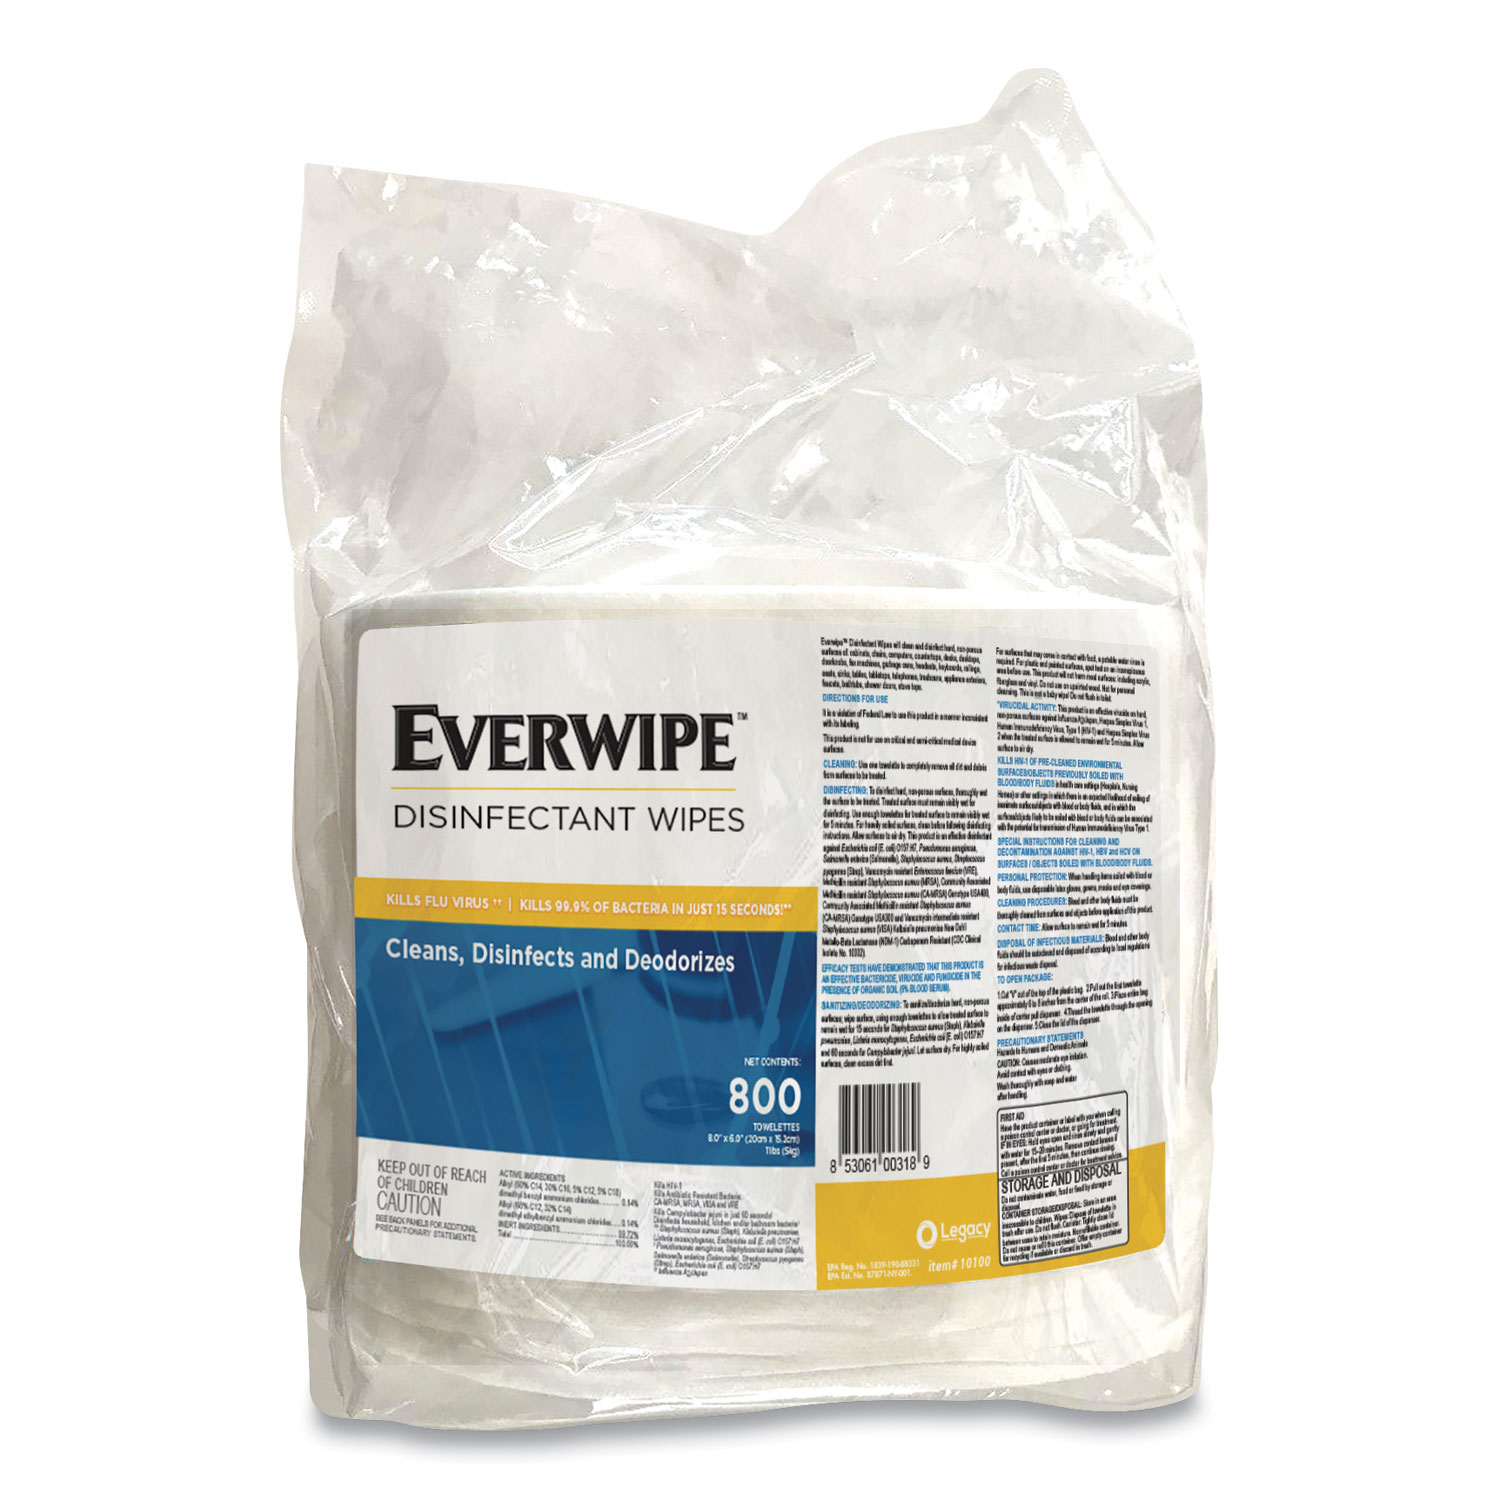  Legacy 10100 Everwipe Disinfectant Wipes, 6 x 8, 800/Bag, 4 Bags/Carton (GN110100) 